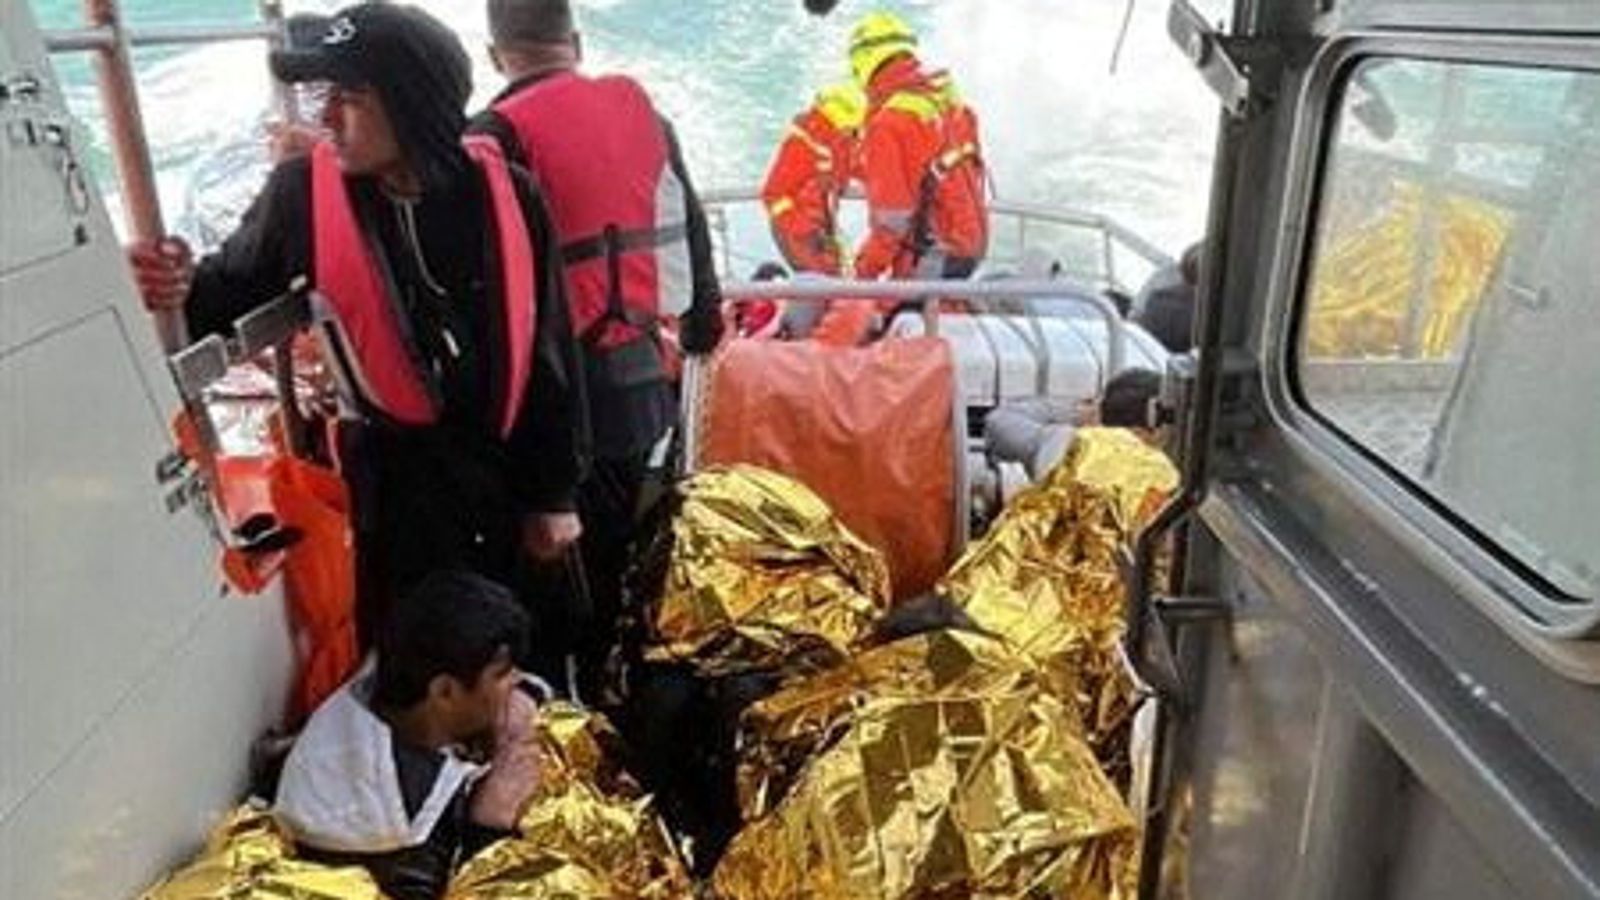 Six deaths after migrant boat sank in Channel were 'appalling and preventable tragedy'